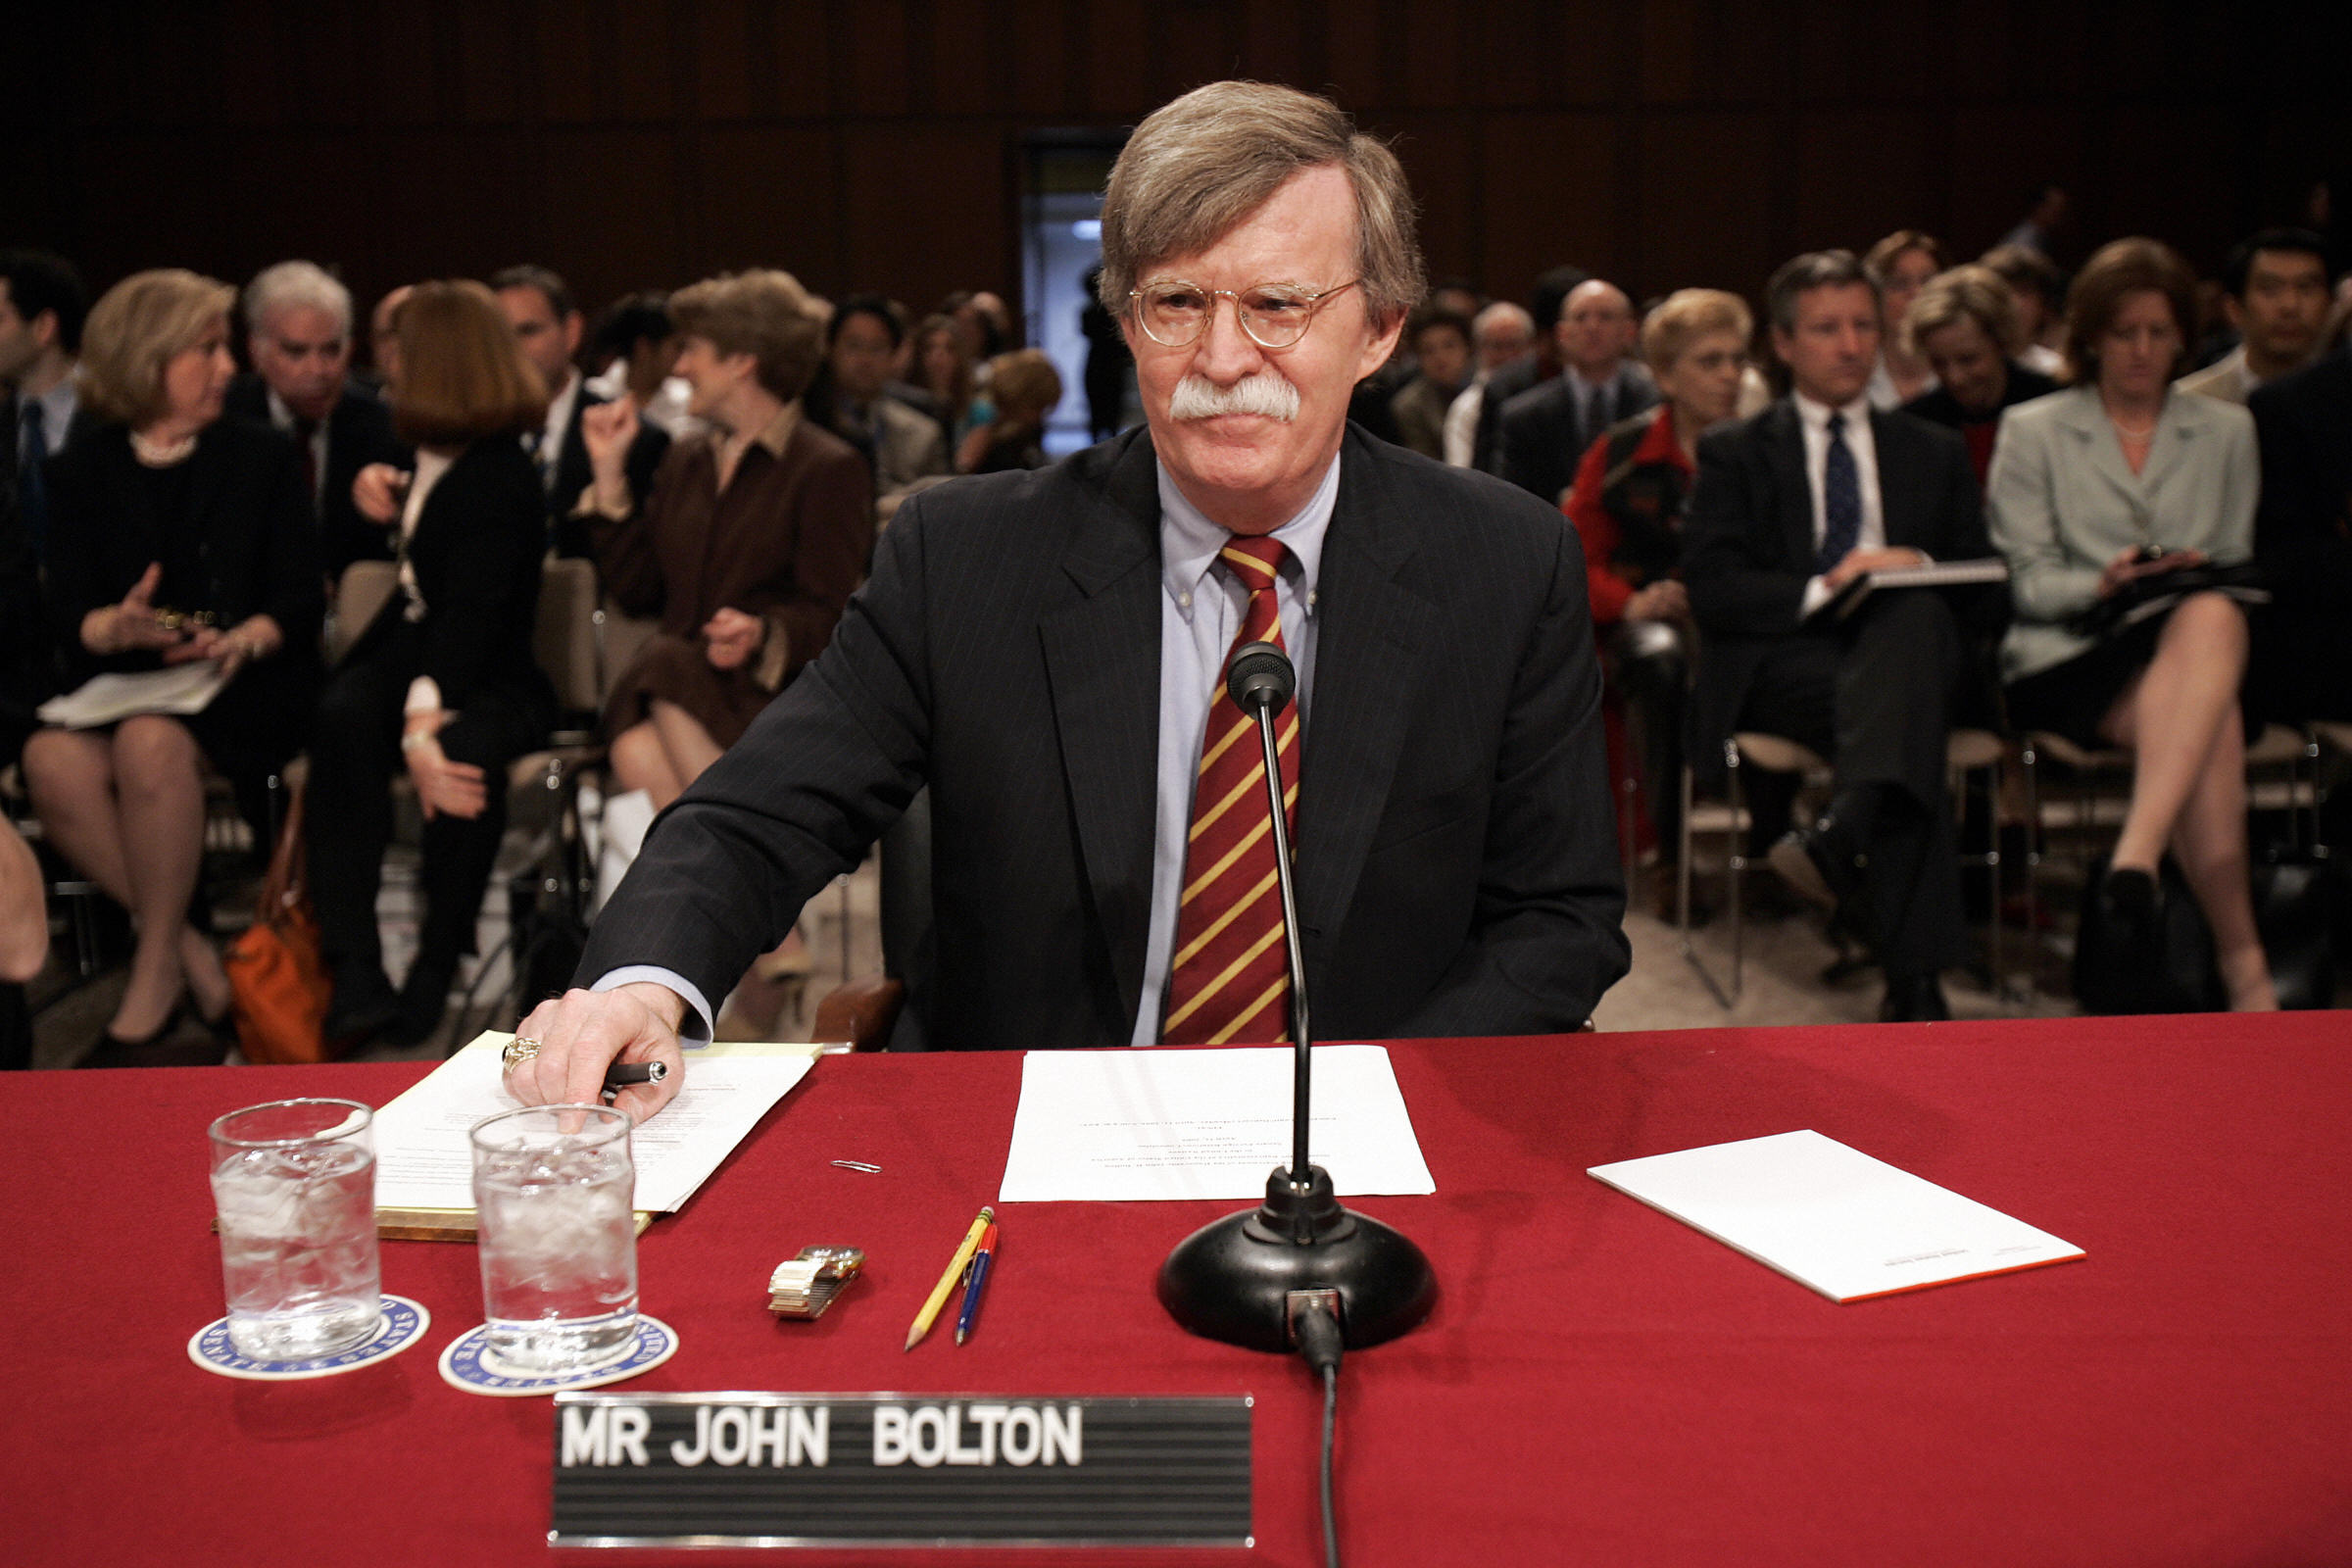 John Bolton takes his seat before a conf